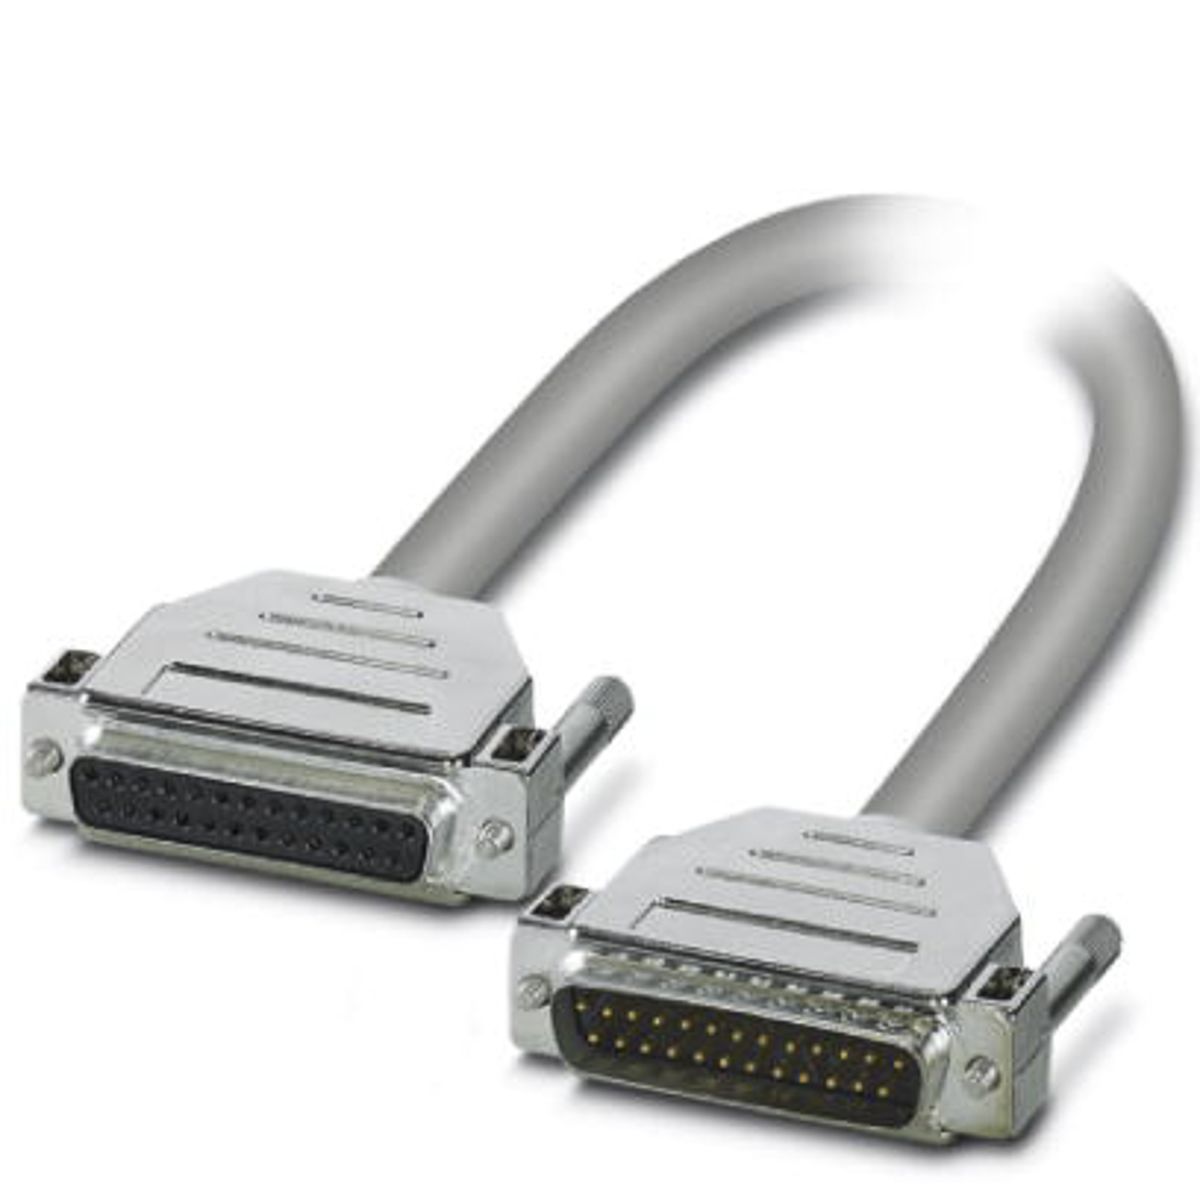 Phoenix Contact 1m 25 pin D-sub to 25 pin D-sub Serial Cable